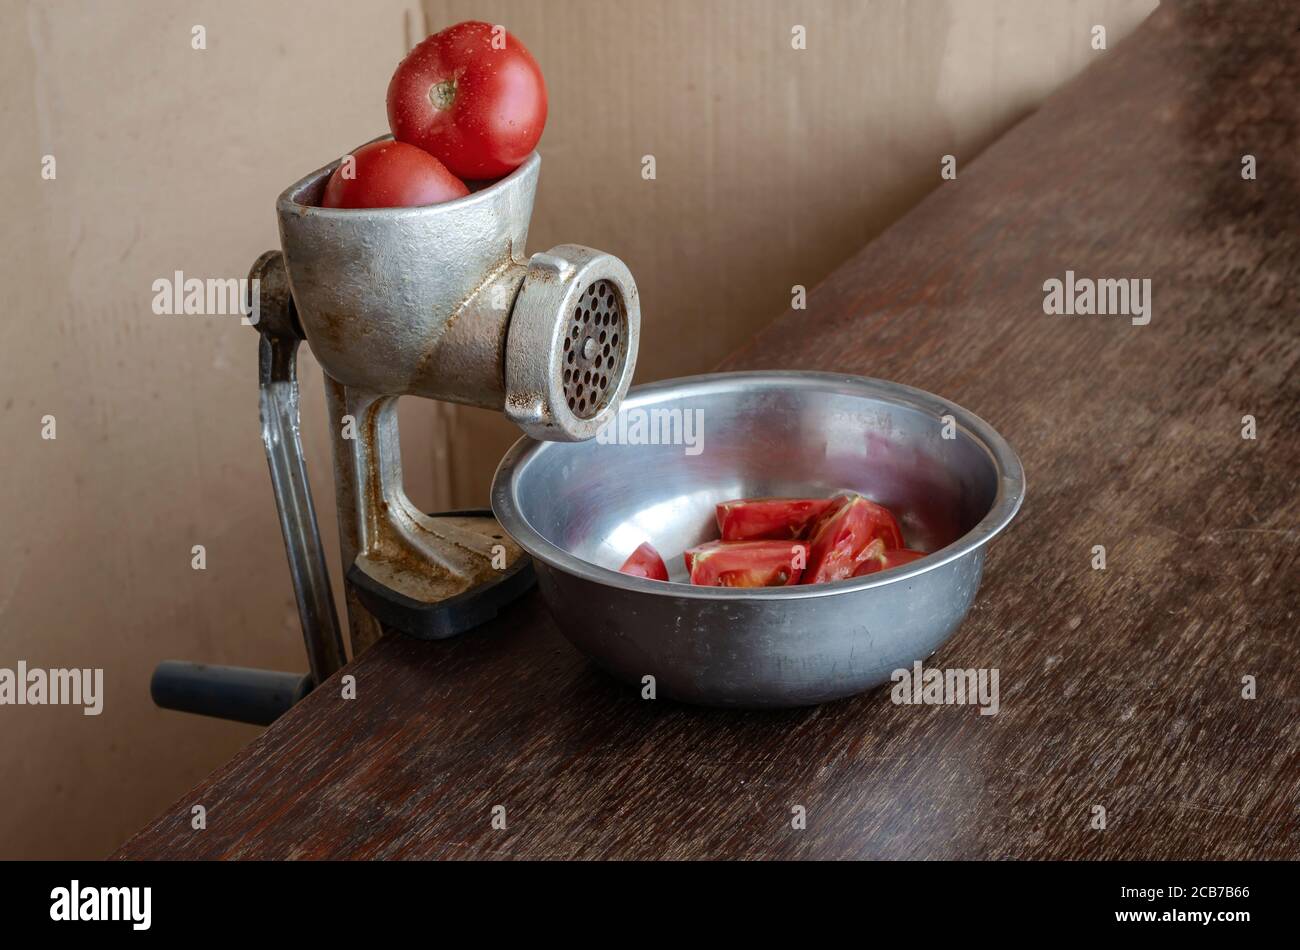 https://c8.alamy.com/comp/2CB7B66/manual-vintage-meat-grinder-and-ripe-tomatoes-on-the-table-making-homemade-tomato-sauce-use-of-outdated-kitchen-utensils-2CB7B66.jpg